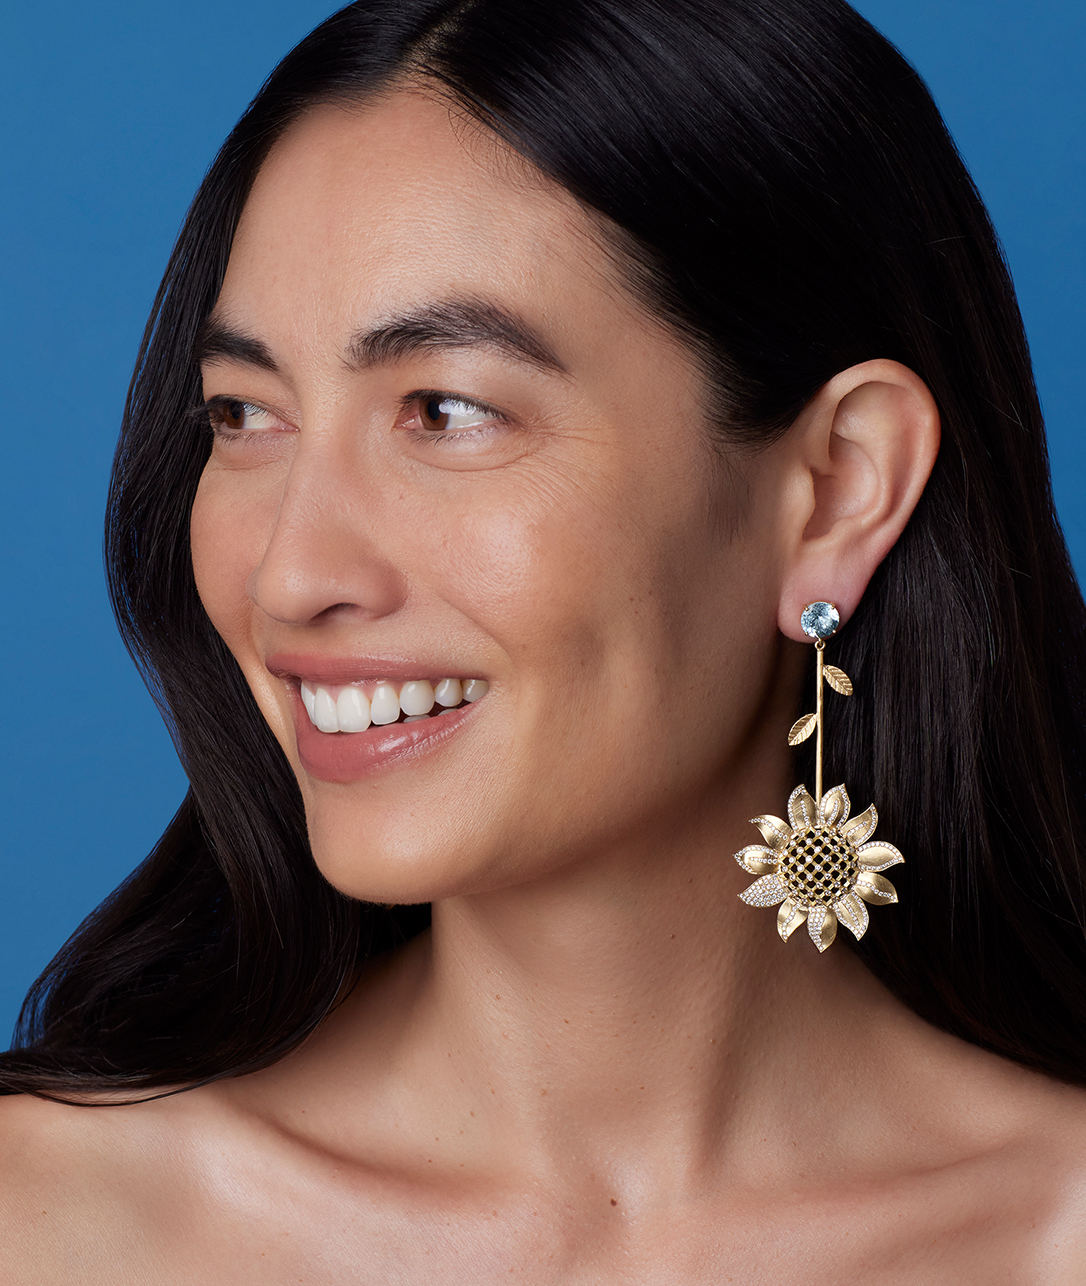                 Our new Golden Blossom Sunflower Earrings shine even brighter with an aquamarine accent.            